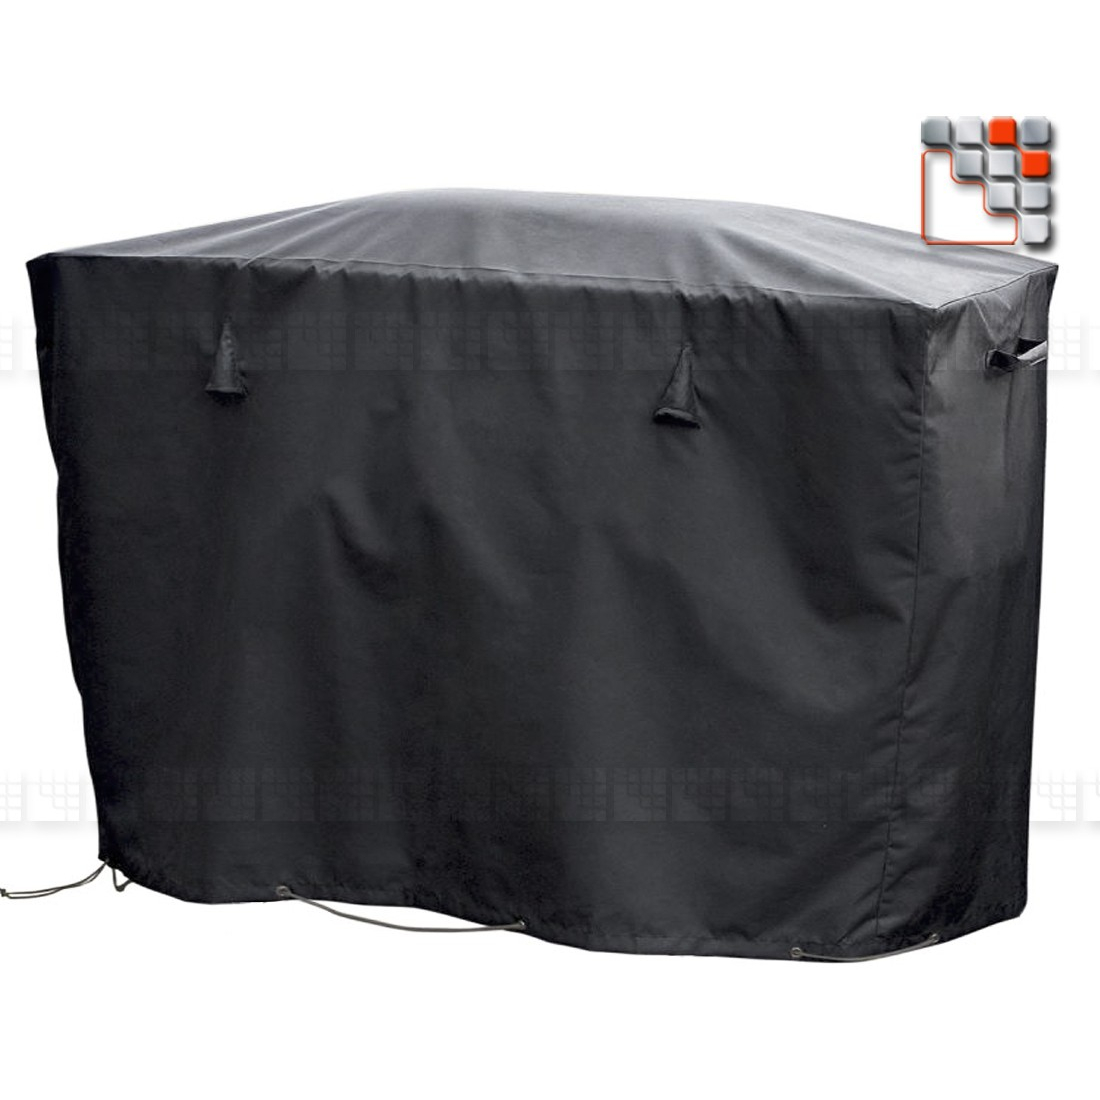 Protective cover 150 x 60 x 110 cm Anti-UV I51-101713 INNOV'AXE Covers & Protections